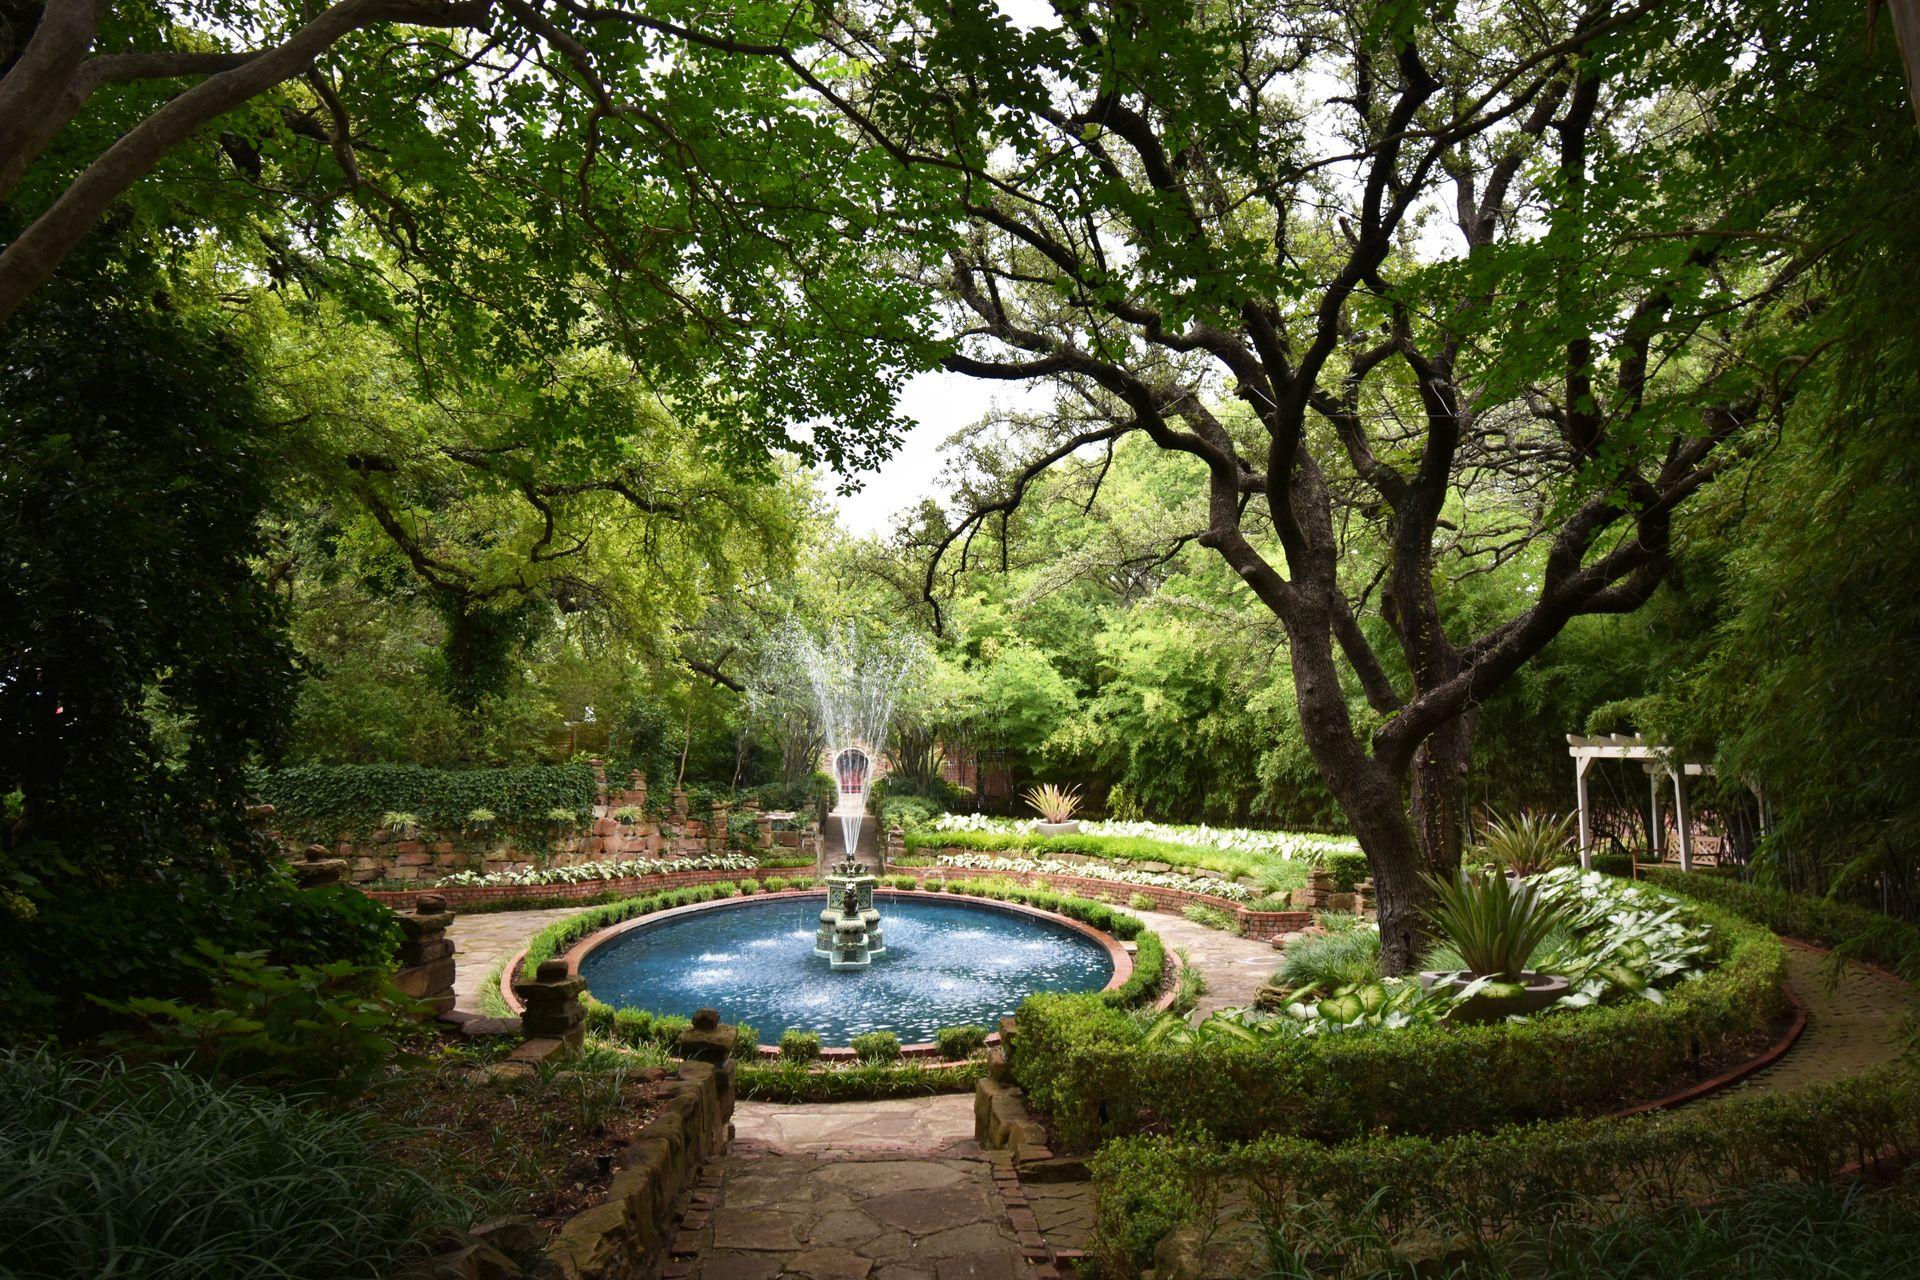 A blue fountain surrounded by green hedges and trees at Chandor Gardens.